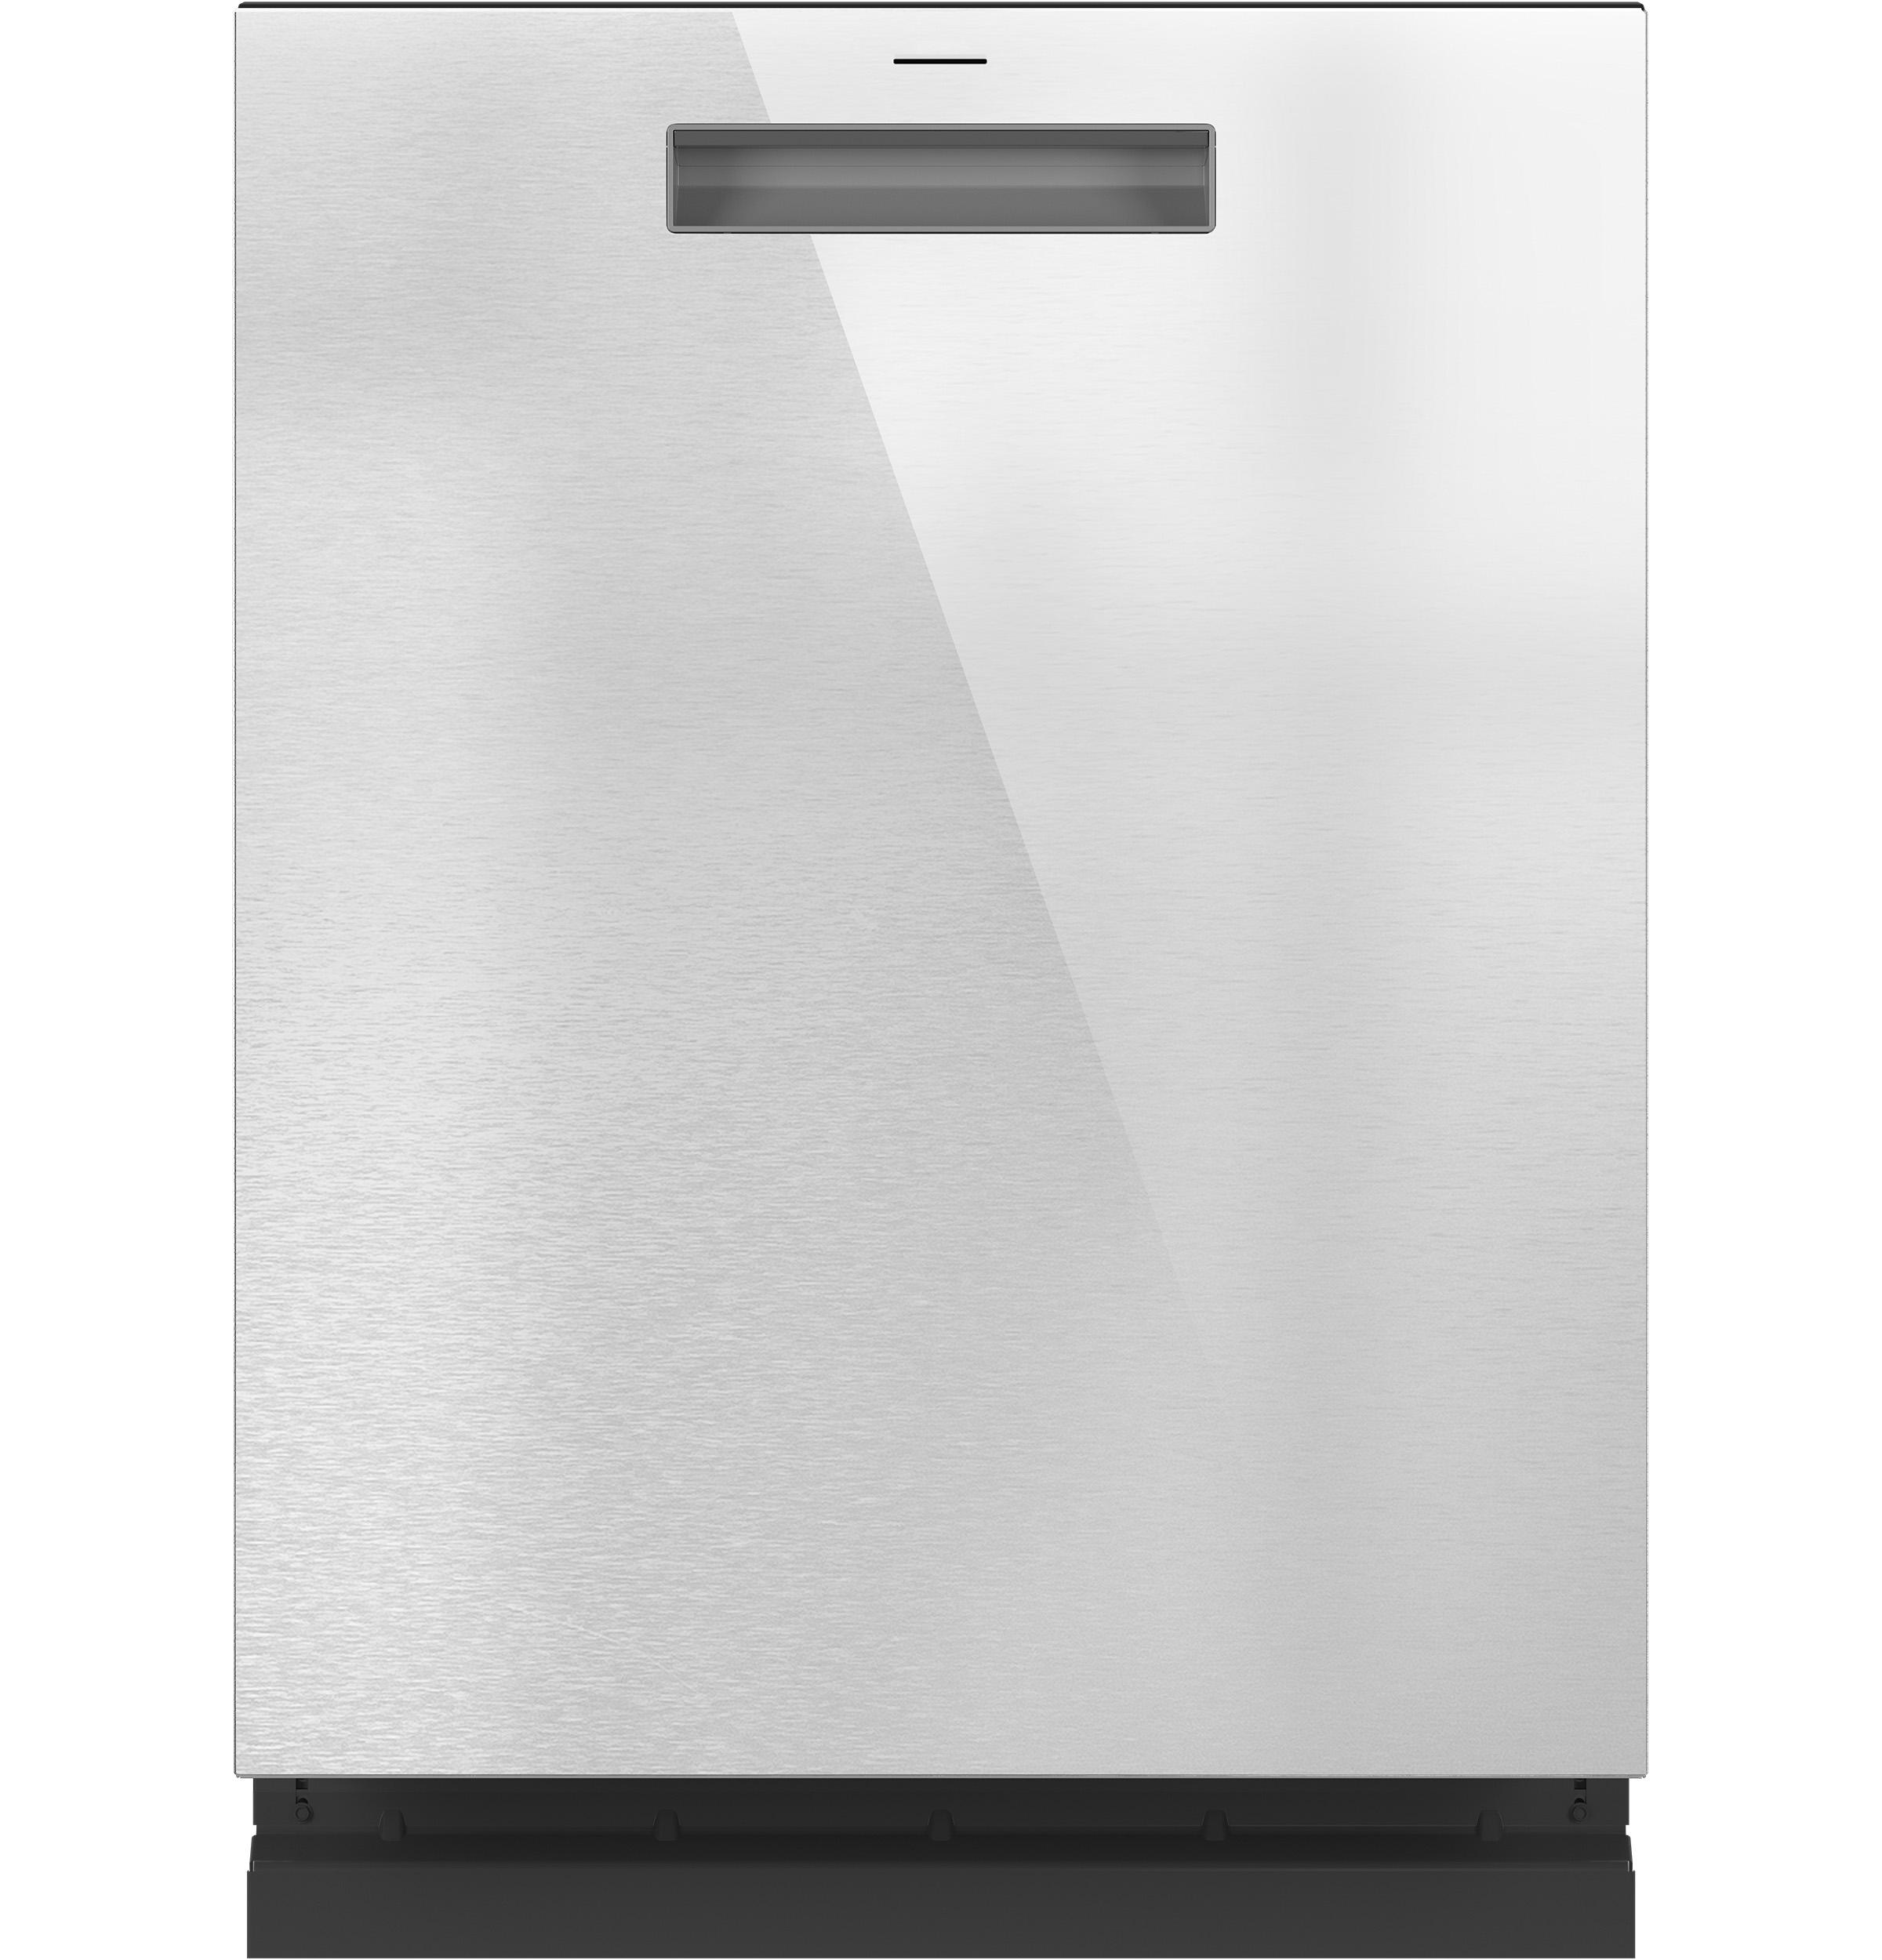 Cafe Caf(eback)™ CustomFit ENERGY STAR Stainless Interior Smart Dishwasher with Ultra Wash Top Rack and Dual Convection Ultra Dry, LED Lights, 39 dBA in Platinum Glass